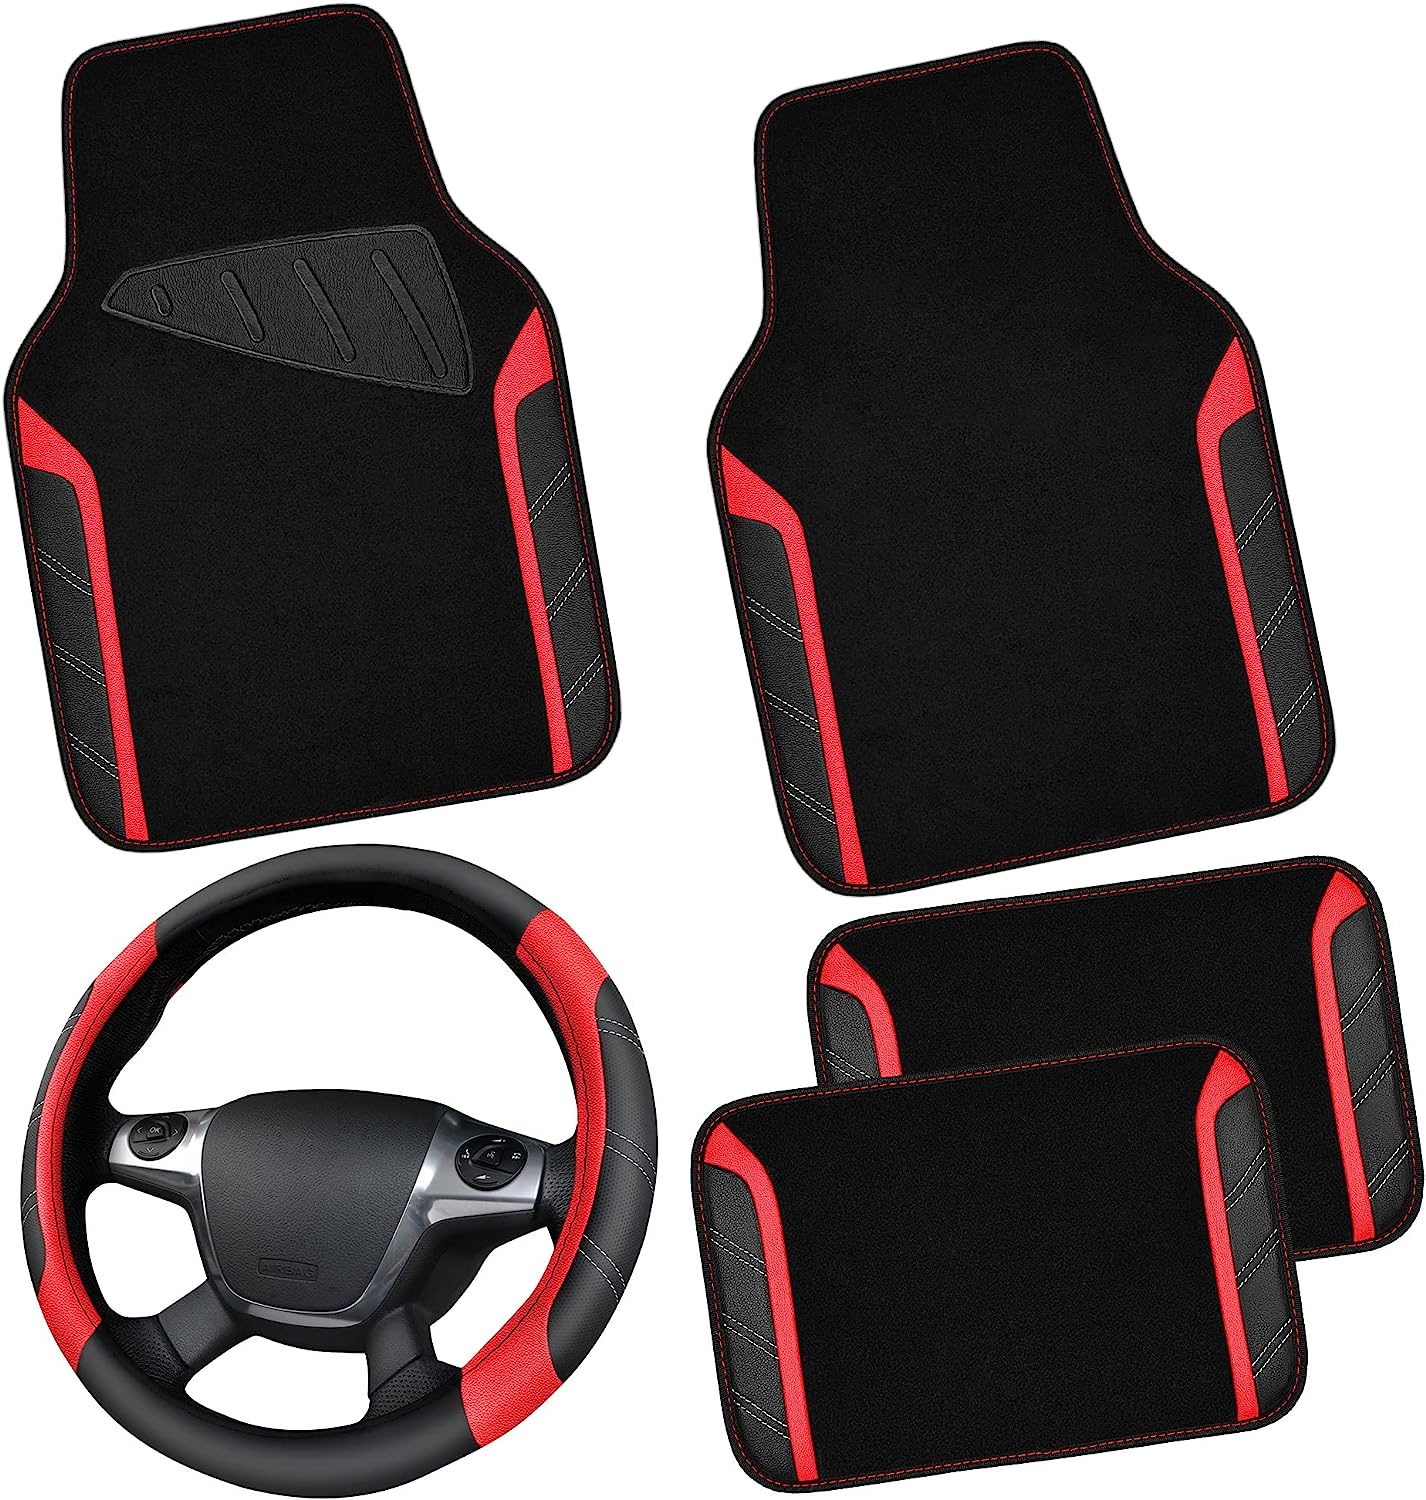 CAR PASS Leather Steering Wheel Cover and Waterproof Car Floor Mats,Microfiber Universal Car Combo Fit for 95% Sedan,SUV,Cars,14.5-15inch Sporty Anti-Slip Safety Comfortable Design(Black＆Red)